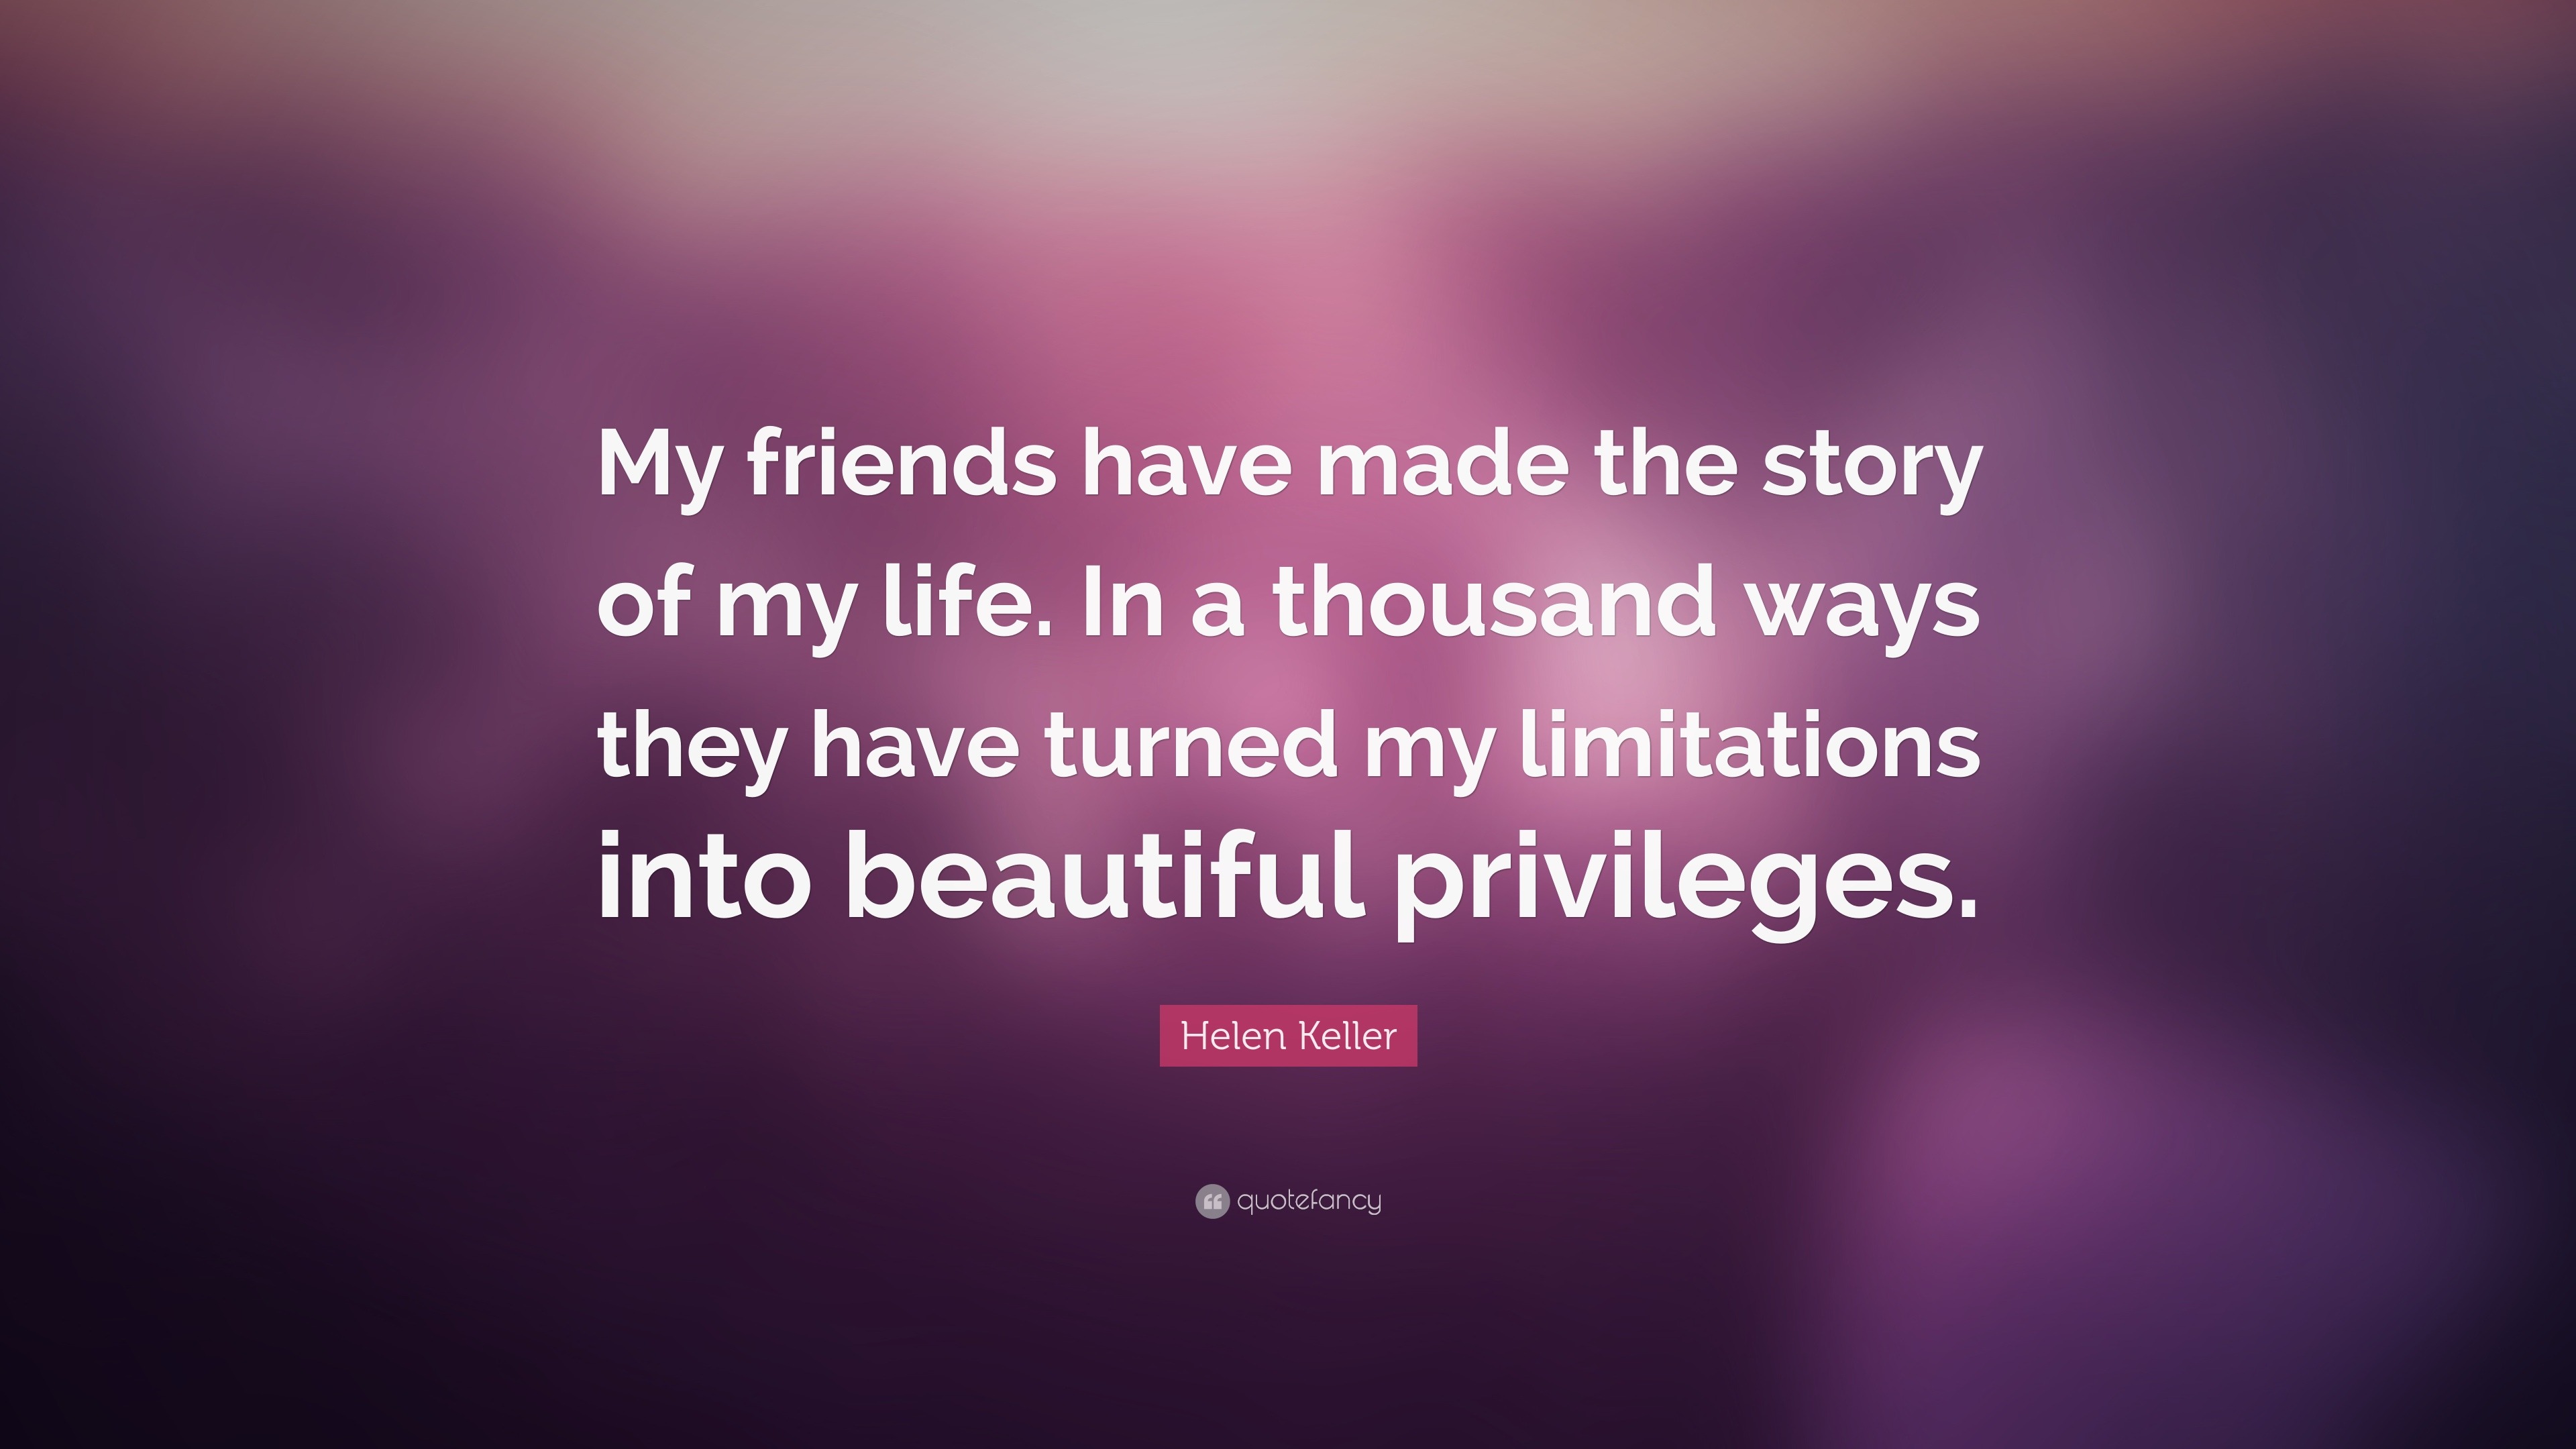 Helen Keller Quote “My friends have made the story of my life In